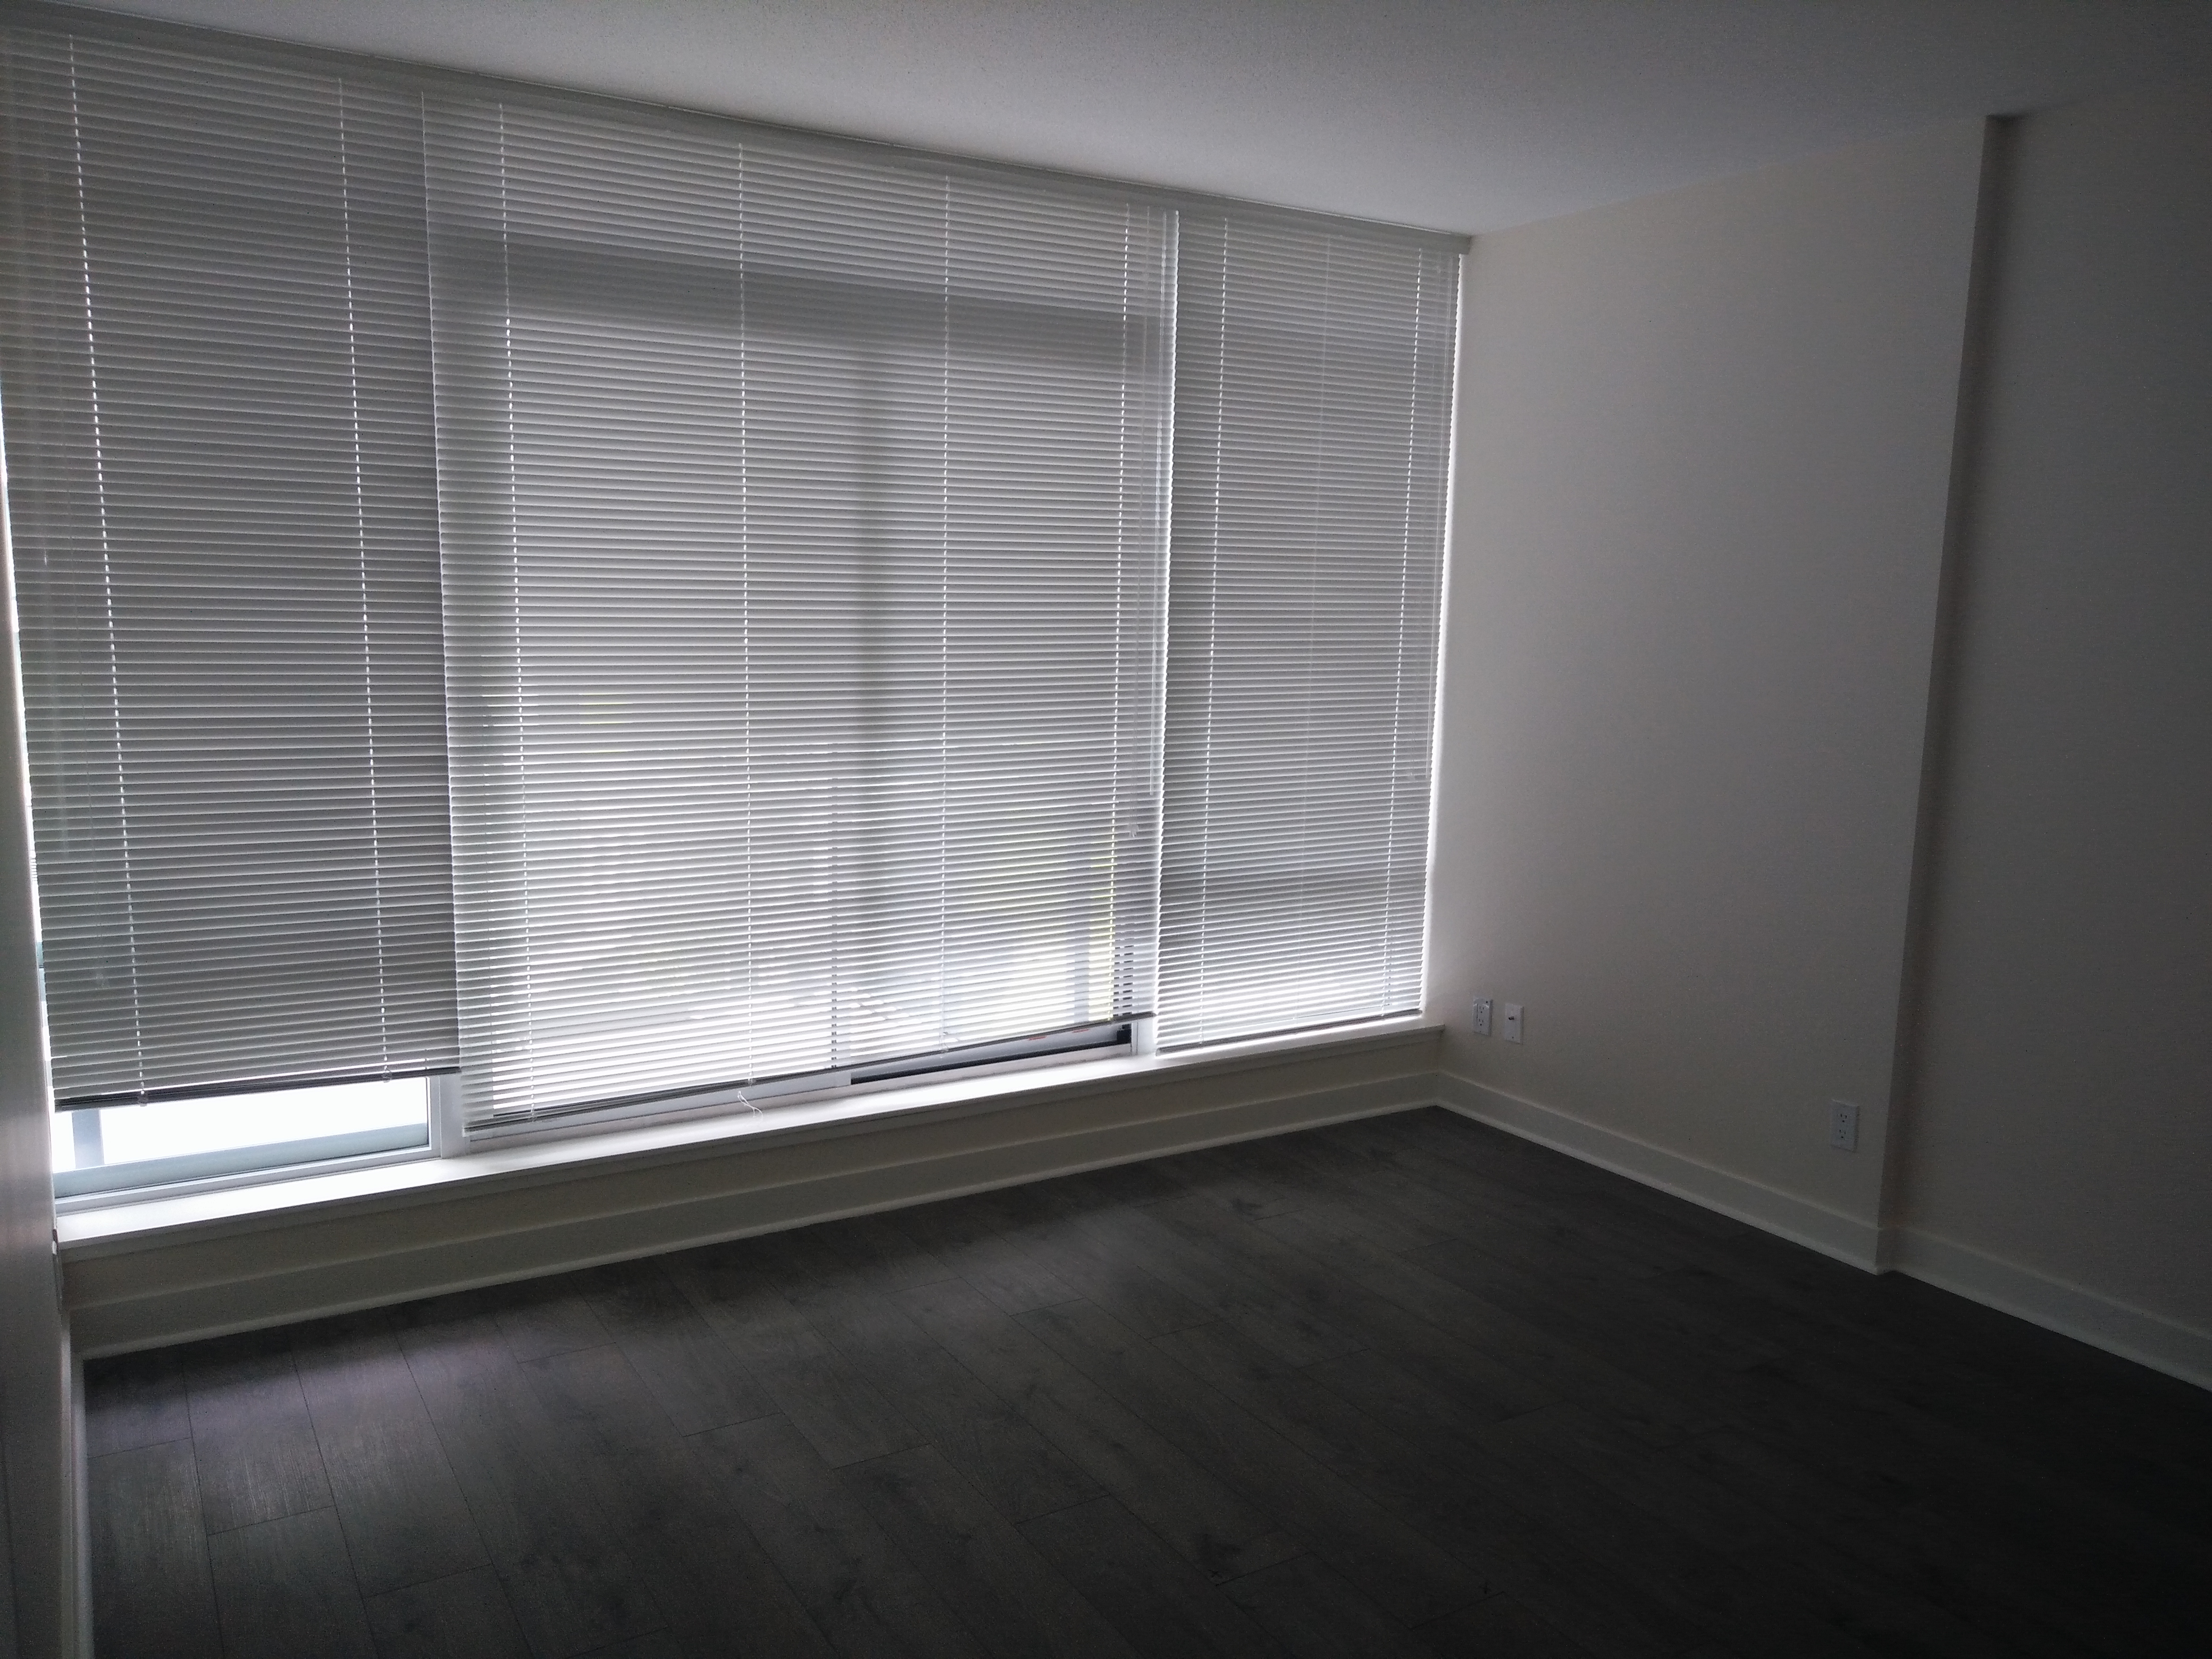 LOCATION! NEWER 1 BEDROOM PLUS DEN APARTMENT NEAR U OF C IN BRENTWOOD!